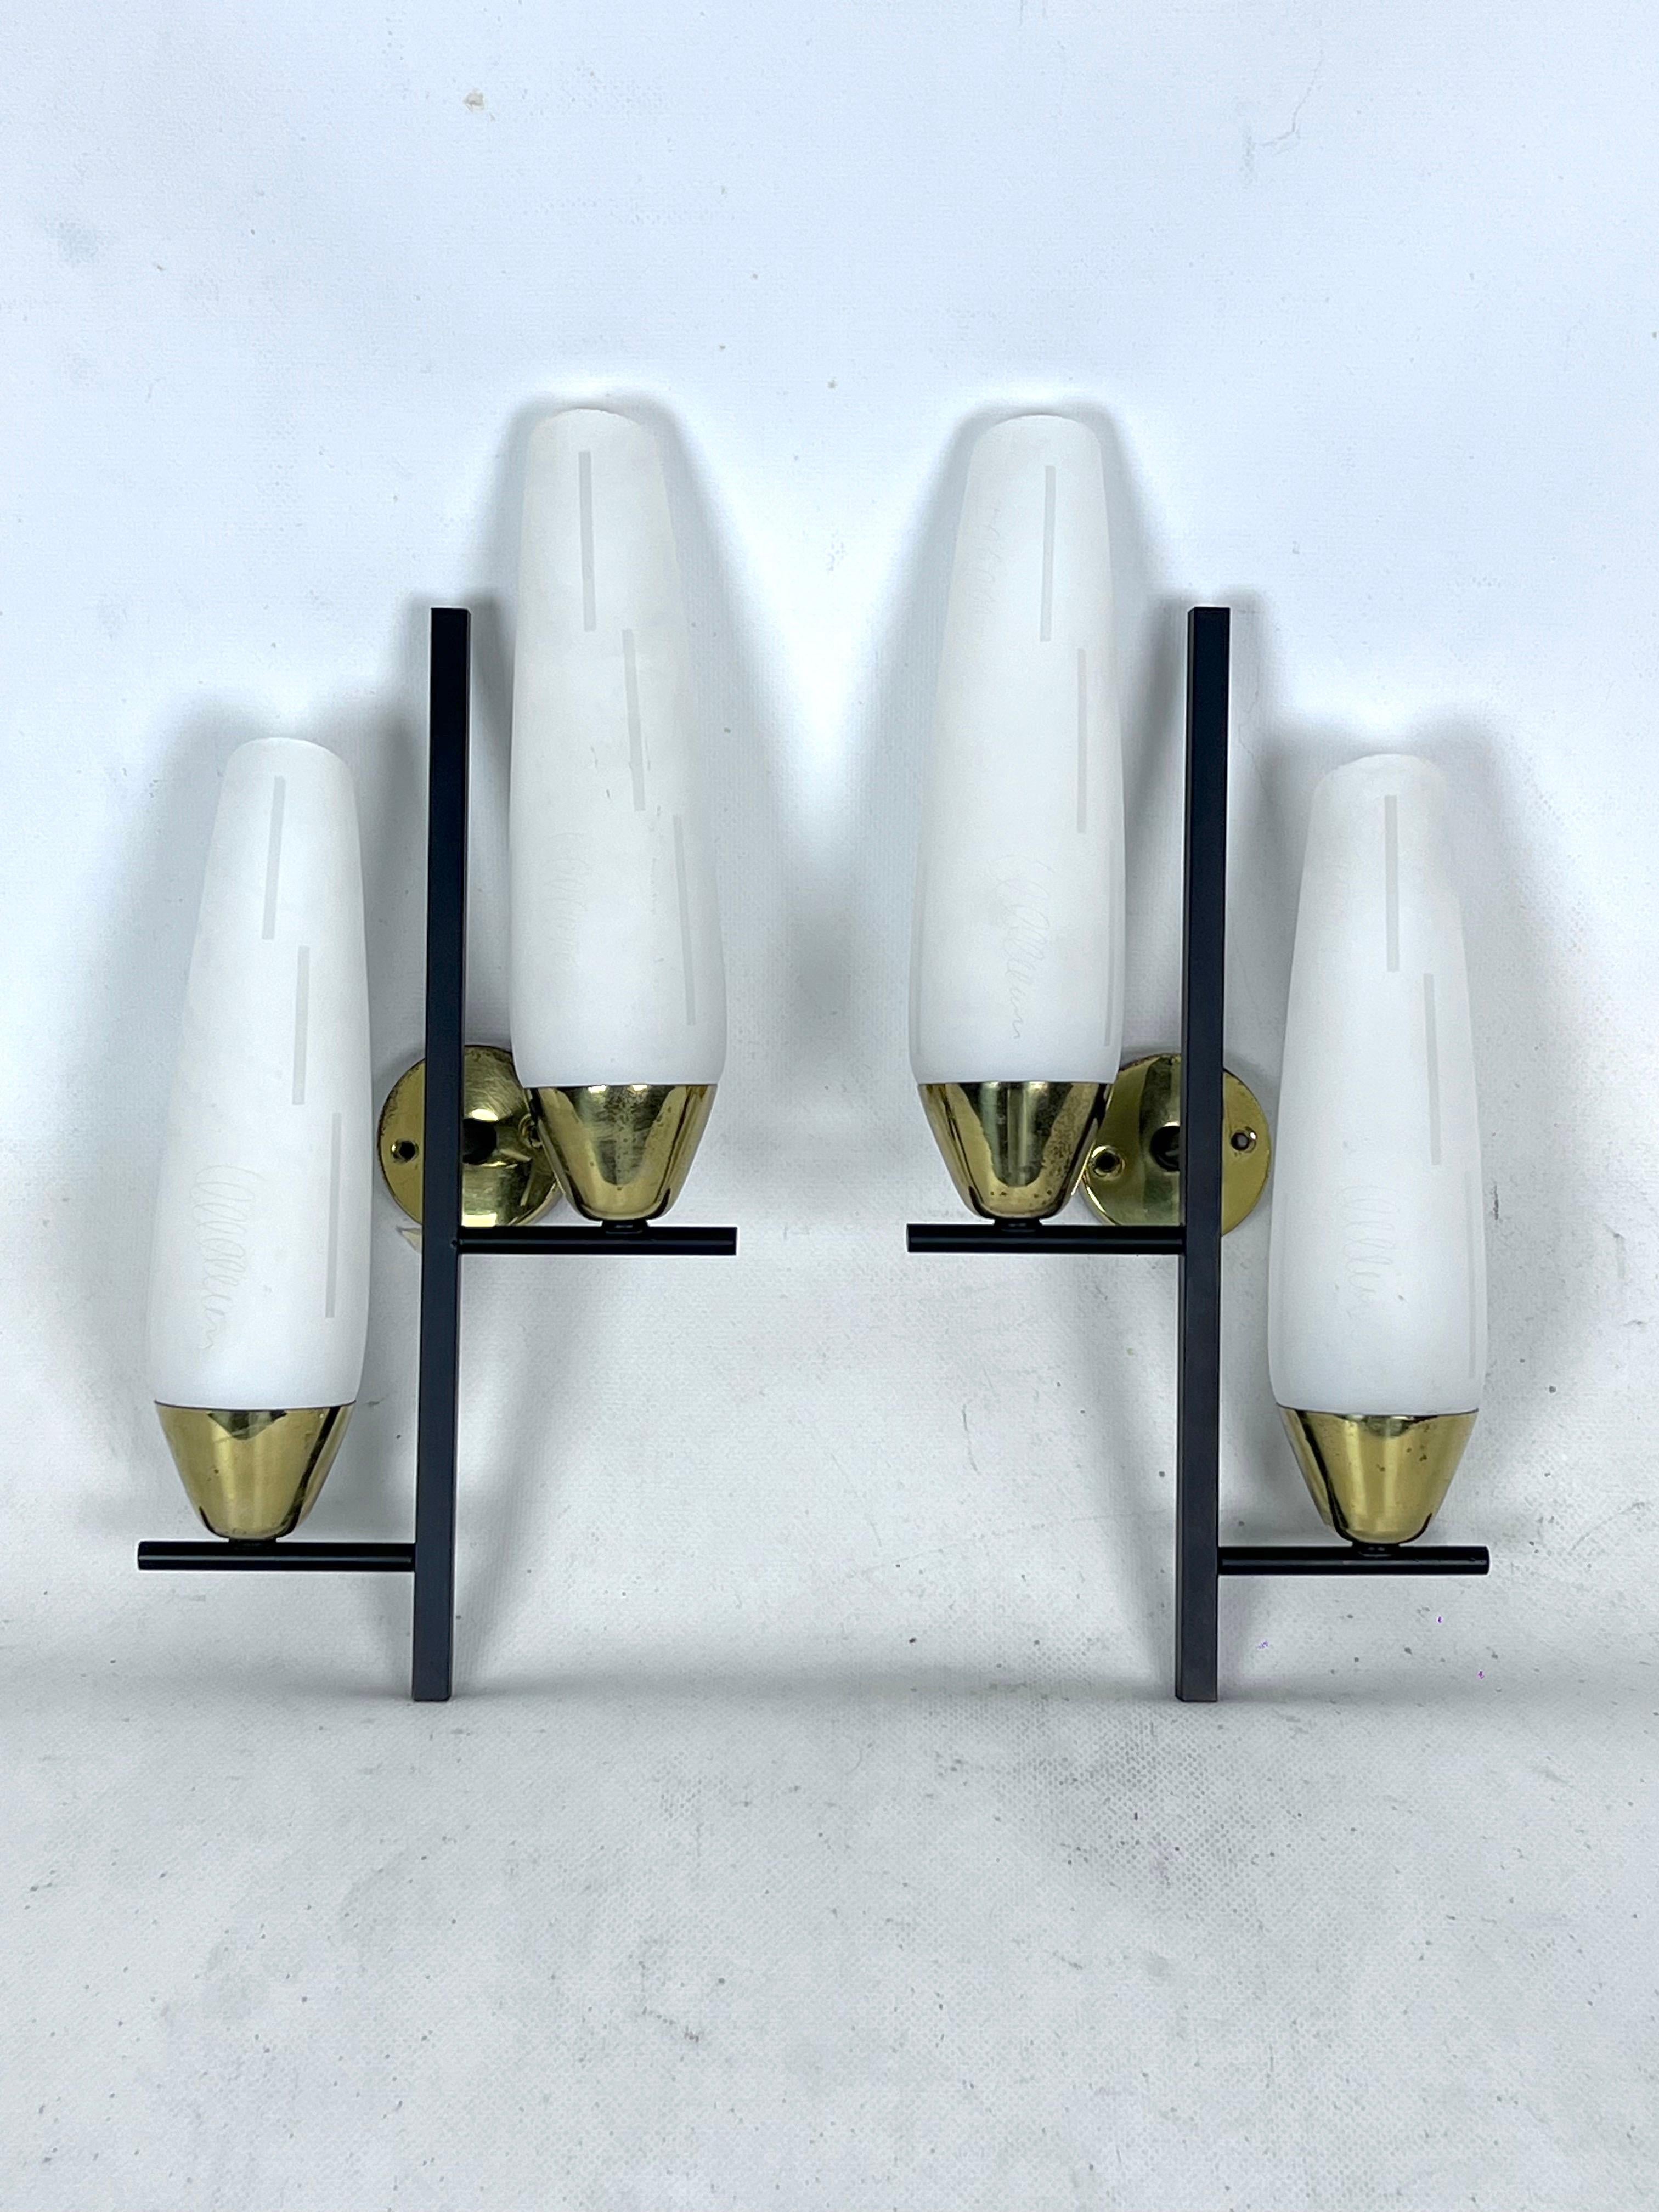 Good vintage condition with normal trace of age and use for this set of two sconces made from brass, lacquered metal and opaline glass. No cracks or chips. Produced in Italy during the 50s and reminiscent of Stilnovo style. Full working with EU